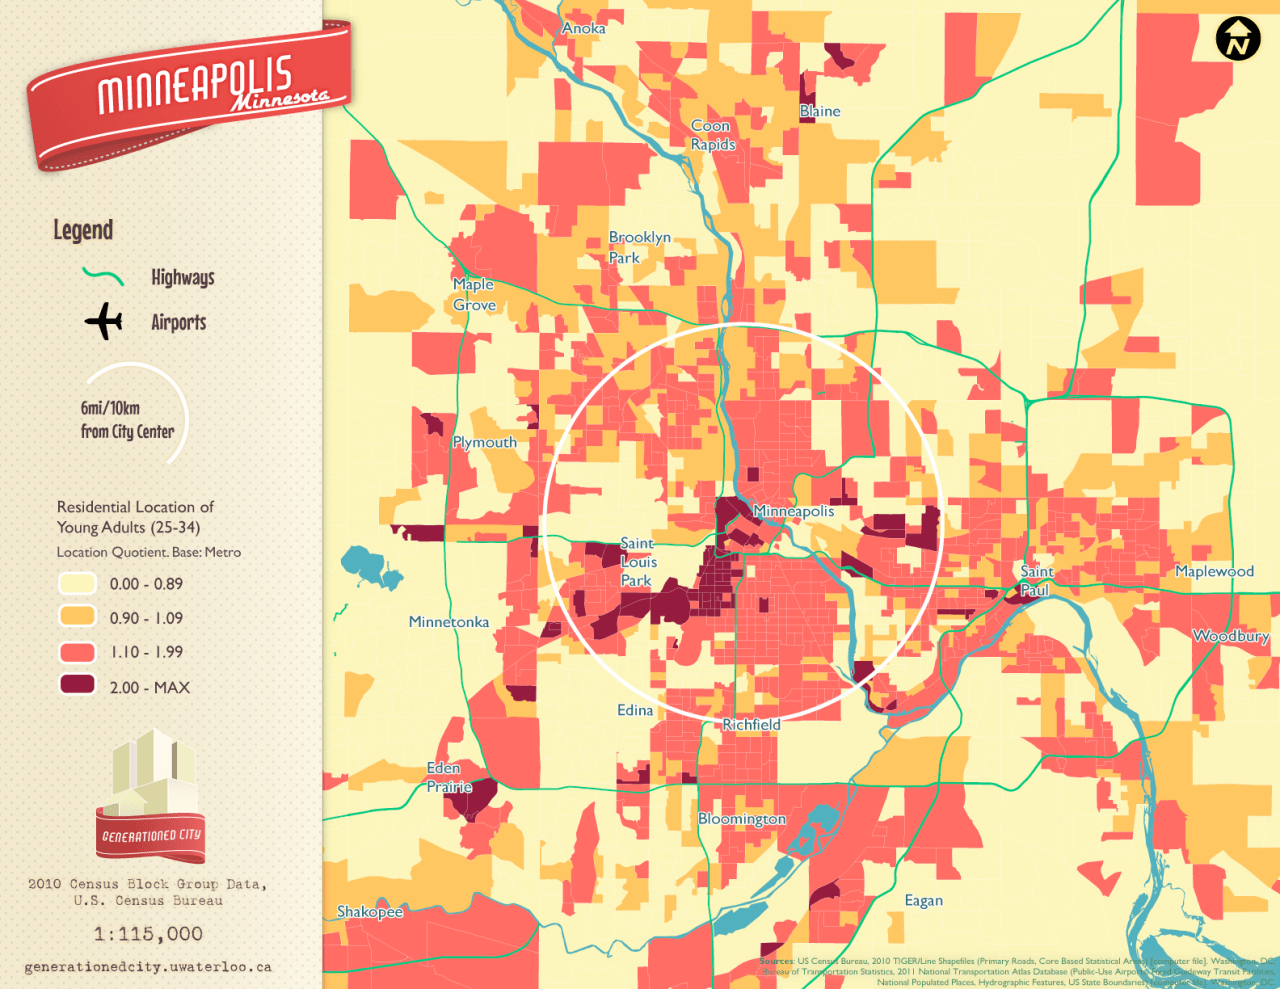 Residential location of young adults in Minneapolis.